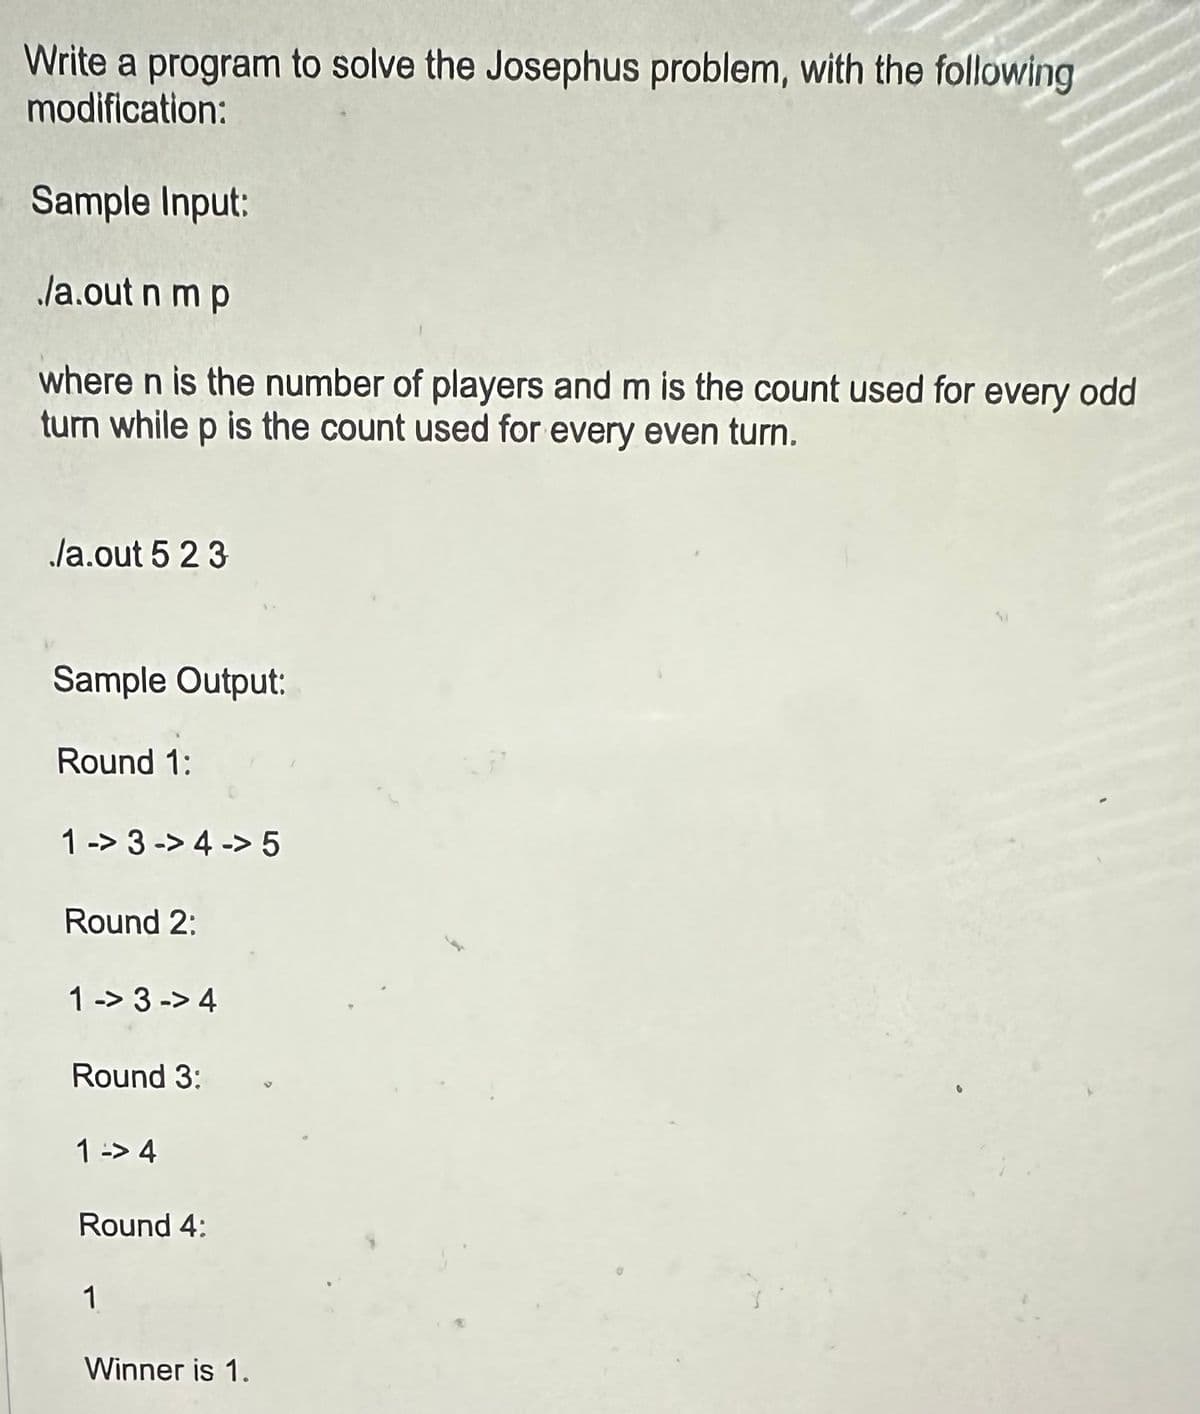 Write a program to solve the Josephus problem, with the following
modification:
Sample Input:
/a.out n m p
where n is the number of players and m is the count used for every odd
turn while p is the count used for every even turn.
./a.out 5 2 3
Sample Output:
Round 1:
1-3-> 4 -> 5
Round 2:
1->3-> 4
Round 3:
1 -> 4
Round 4:
1
Winner is 1.